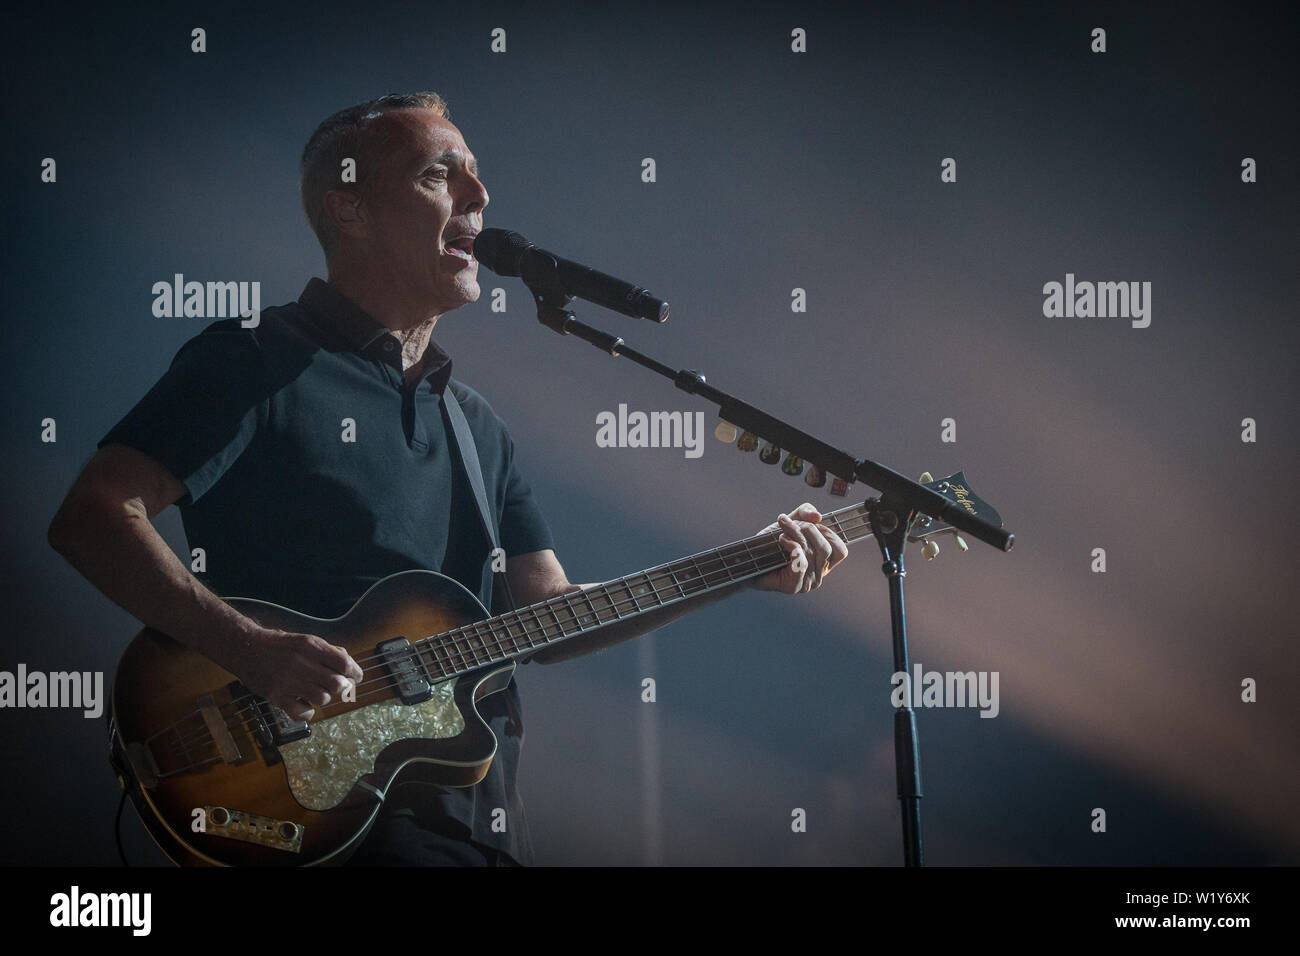 Roskilde, Denmark. July 03rd, 2019. The English pop rock band Tears For Fears performs a live concert during the Danish music festival Roskilde Festival 2019. Here singer and musician Curt Smith is seen live on stage. (Photo credit: Gonzales Photo - Thomas Rasmussen). Stock Photo